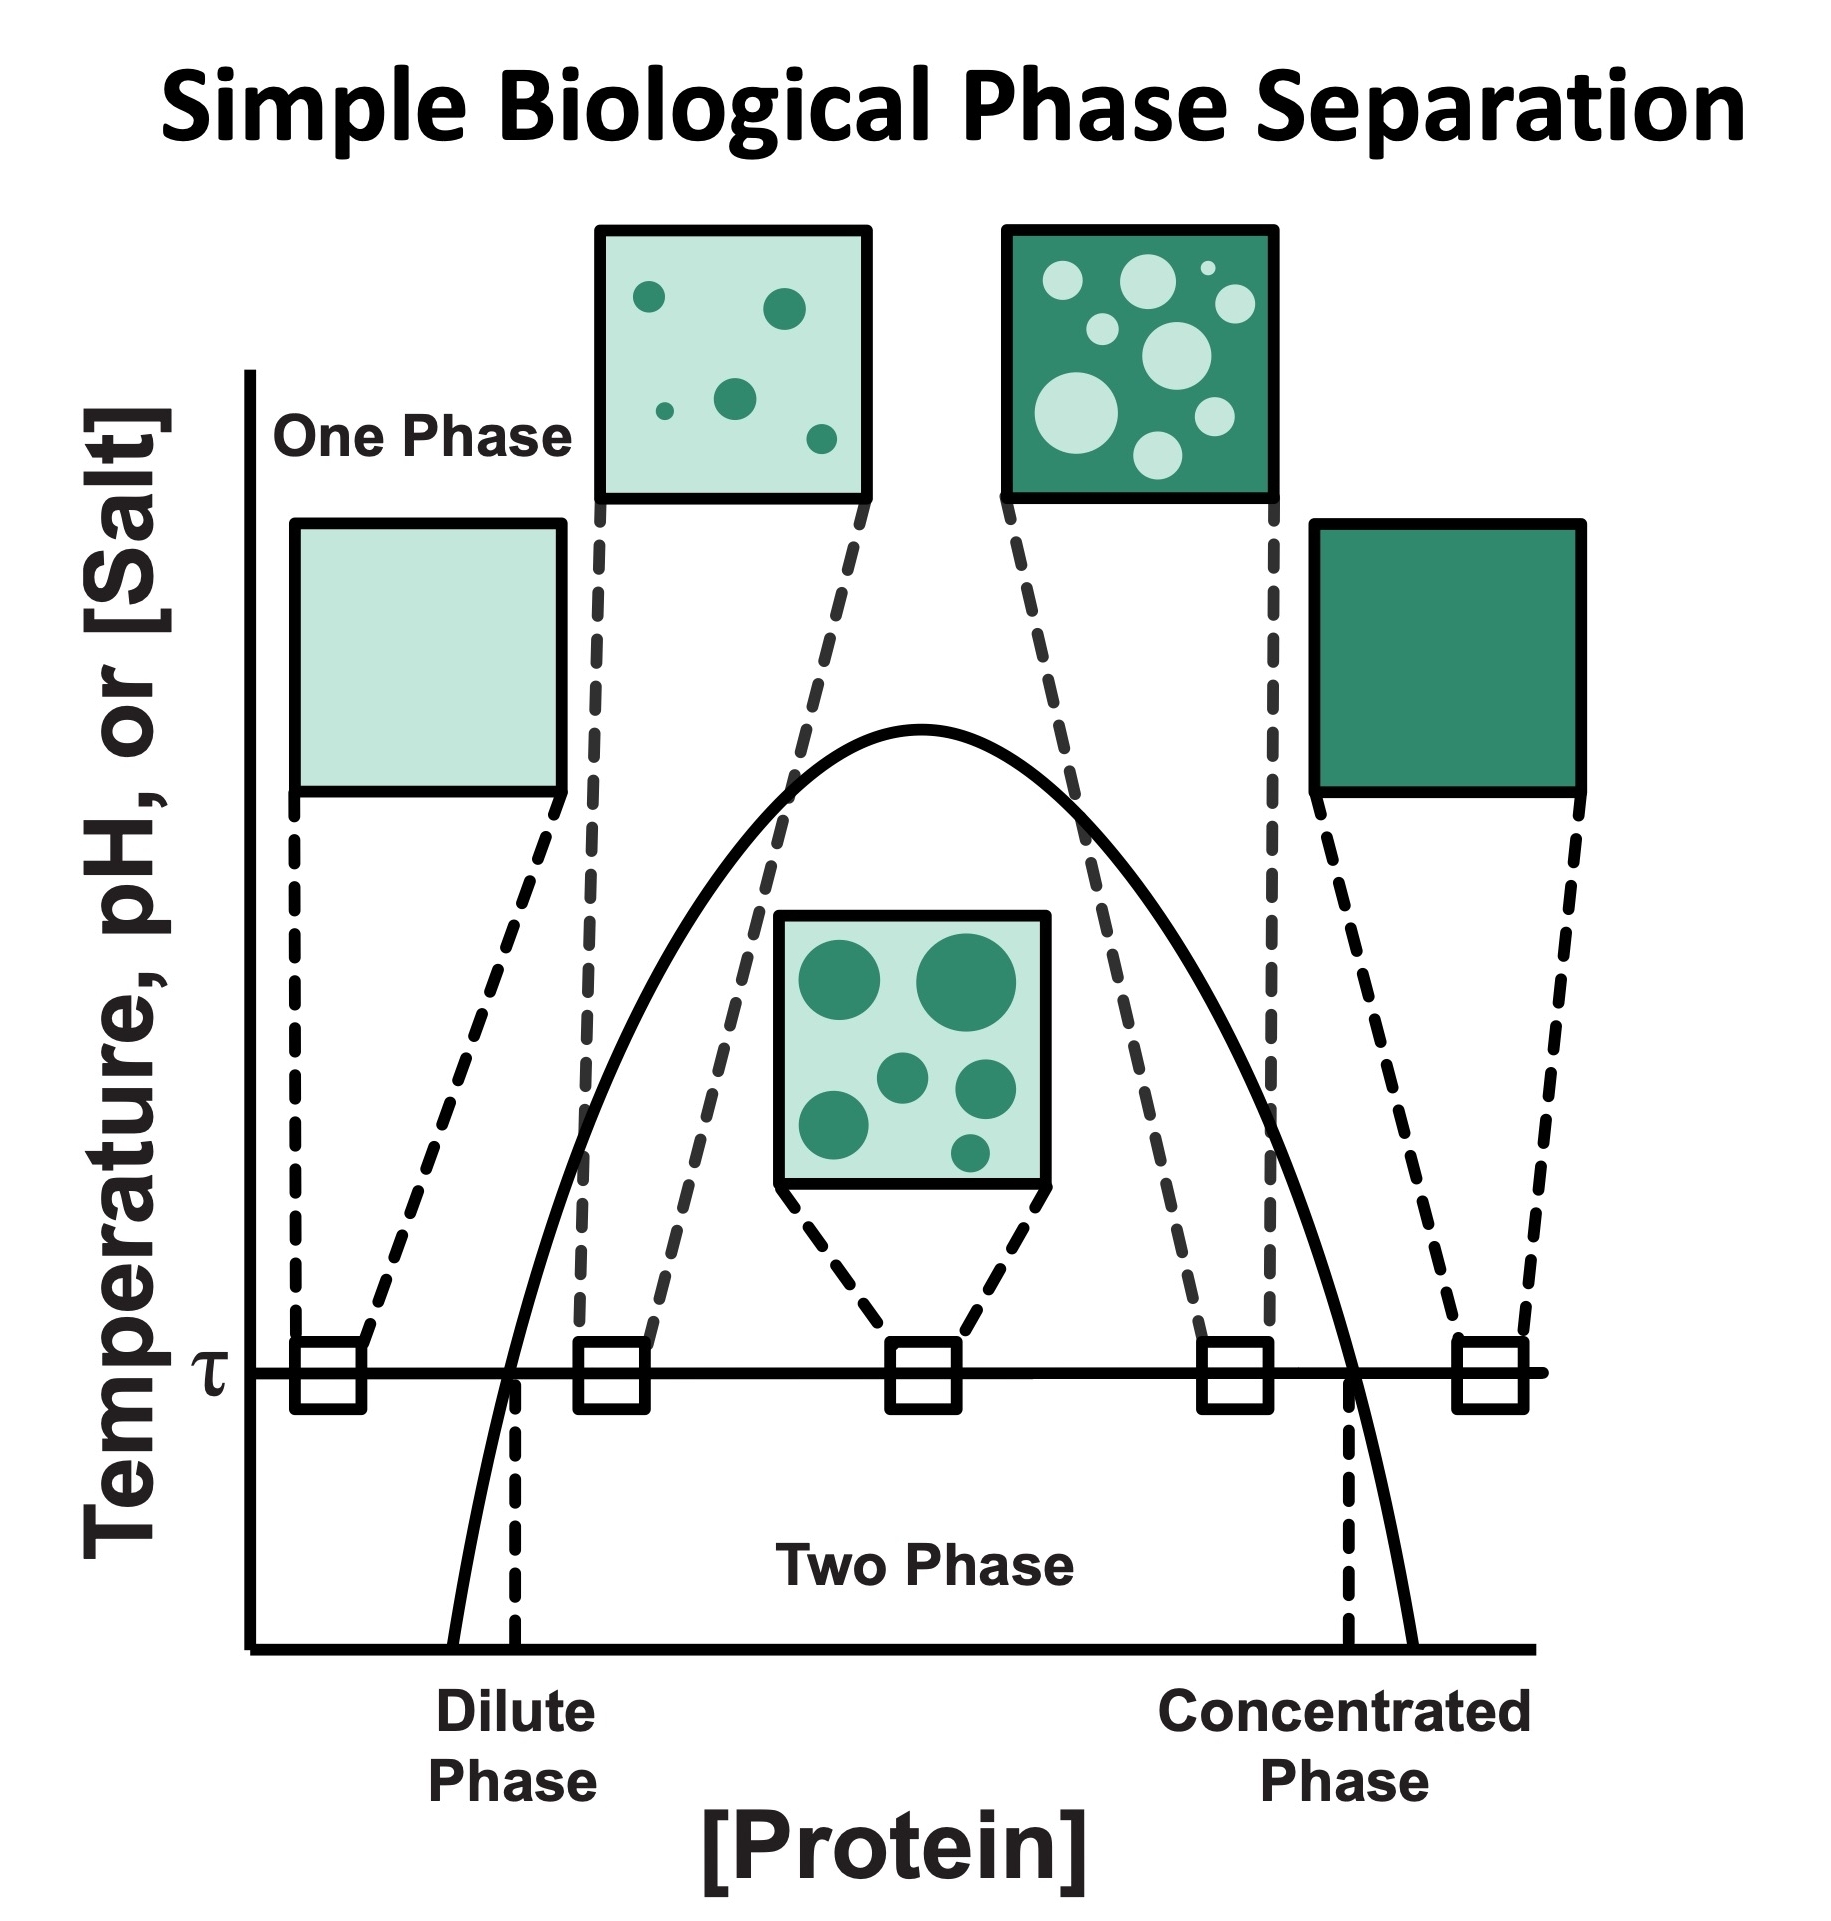 Image depicting a phase a diagram. The x-axis shows protein concentration whilst the y-axis shows temperature, pH, or Salt concentration. Depending on the parameters, proteins can exist in a dilute or concentration phase. However if given ideal parameters, proteins can exist in a two phase where droplet formation is prevalent. 